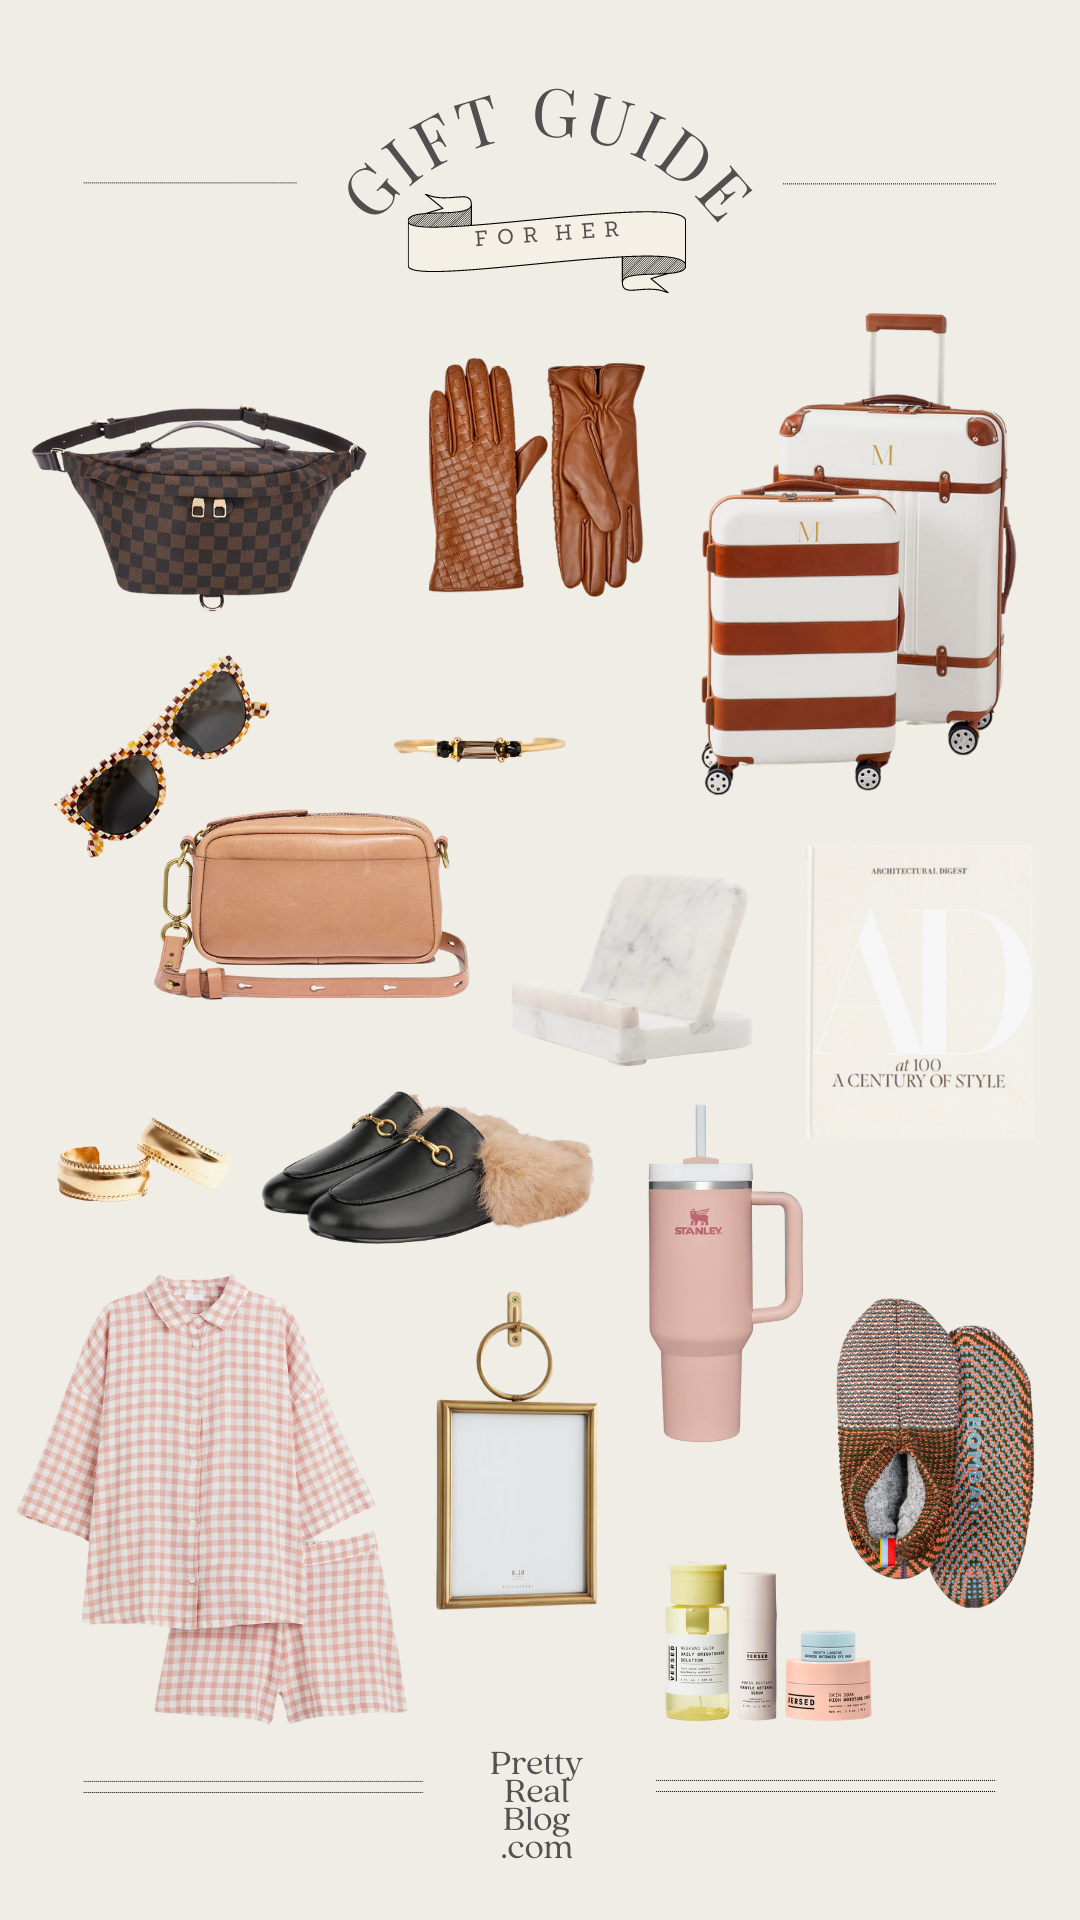 A Stylish Gift Guide for Her